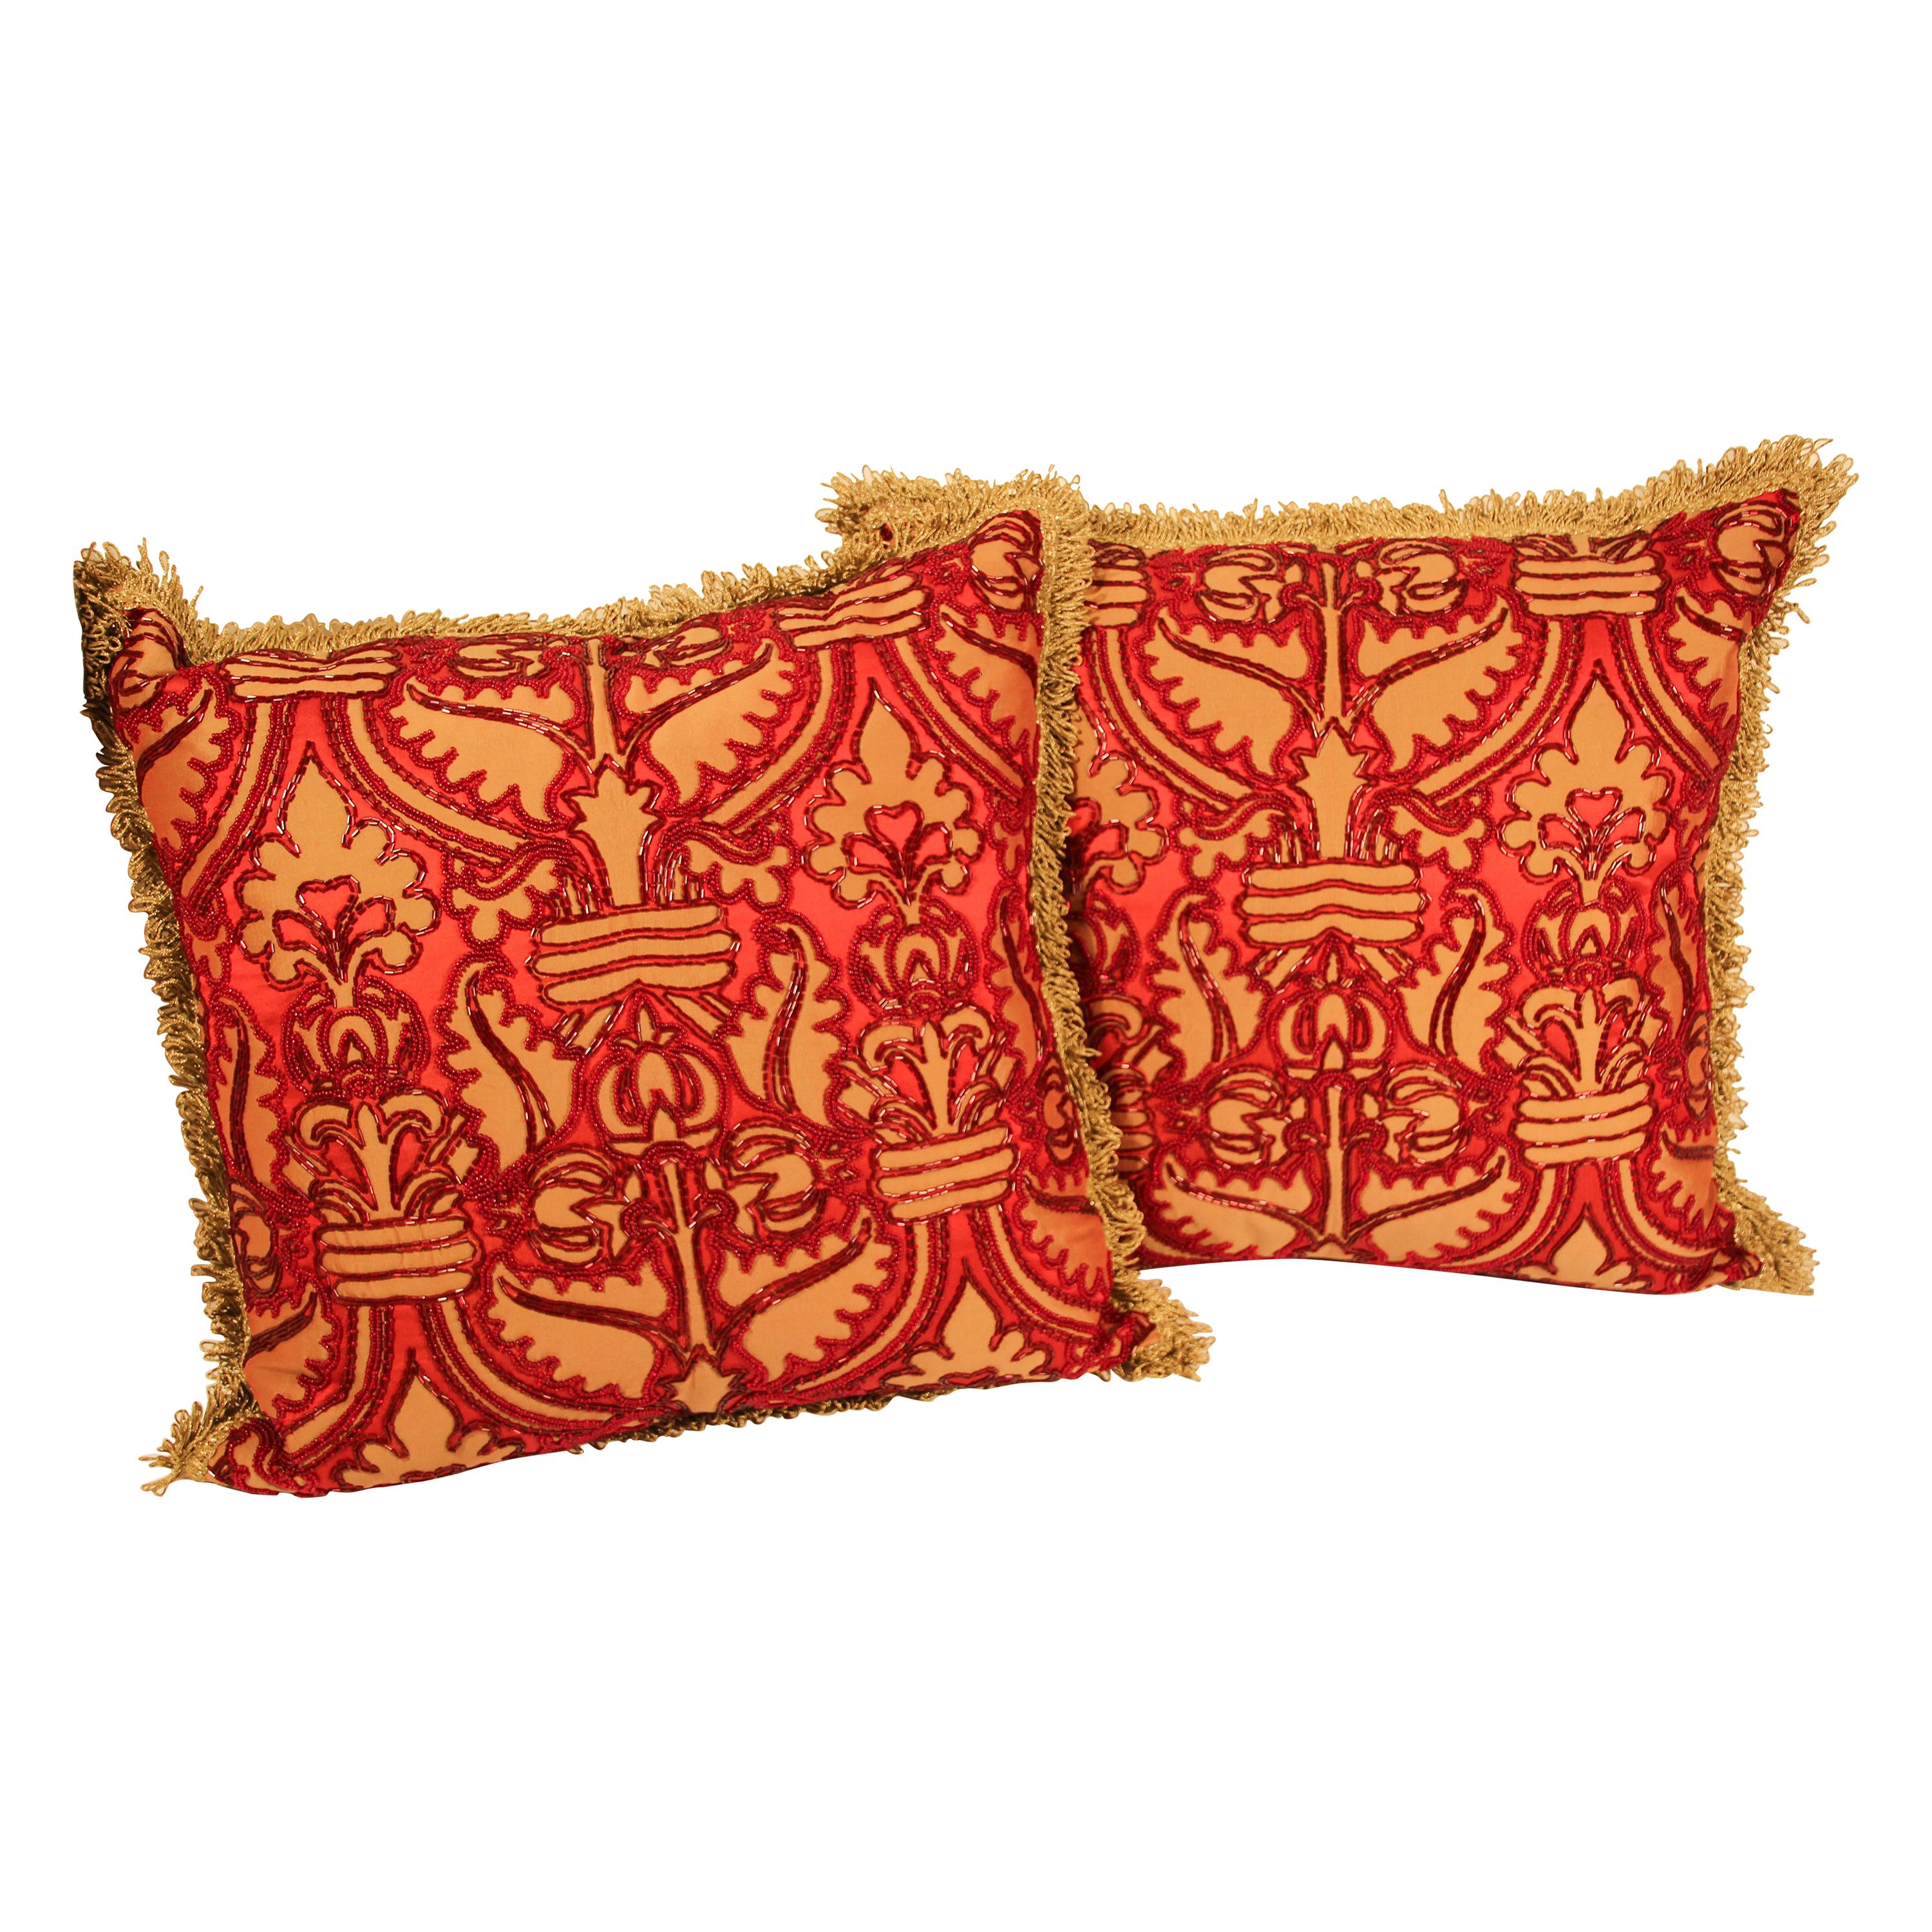 Pair of Large Silk Pillows with Metallic Threads and Red Beads at 1stDibs